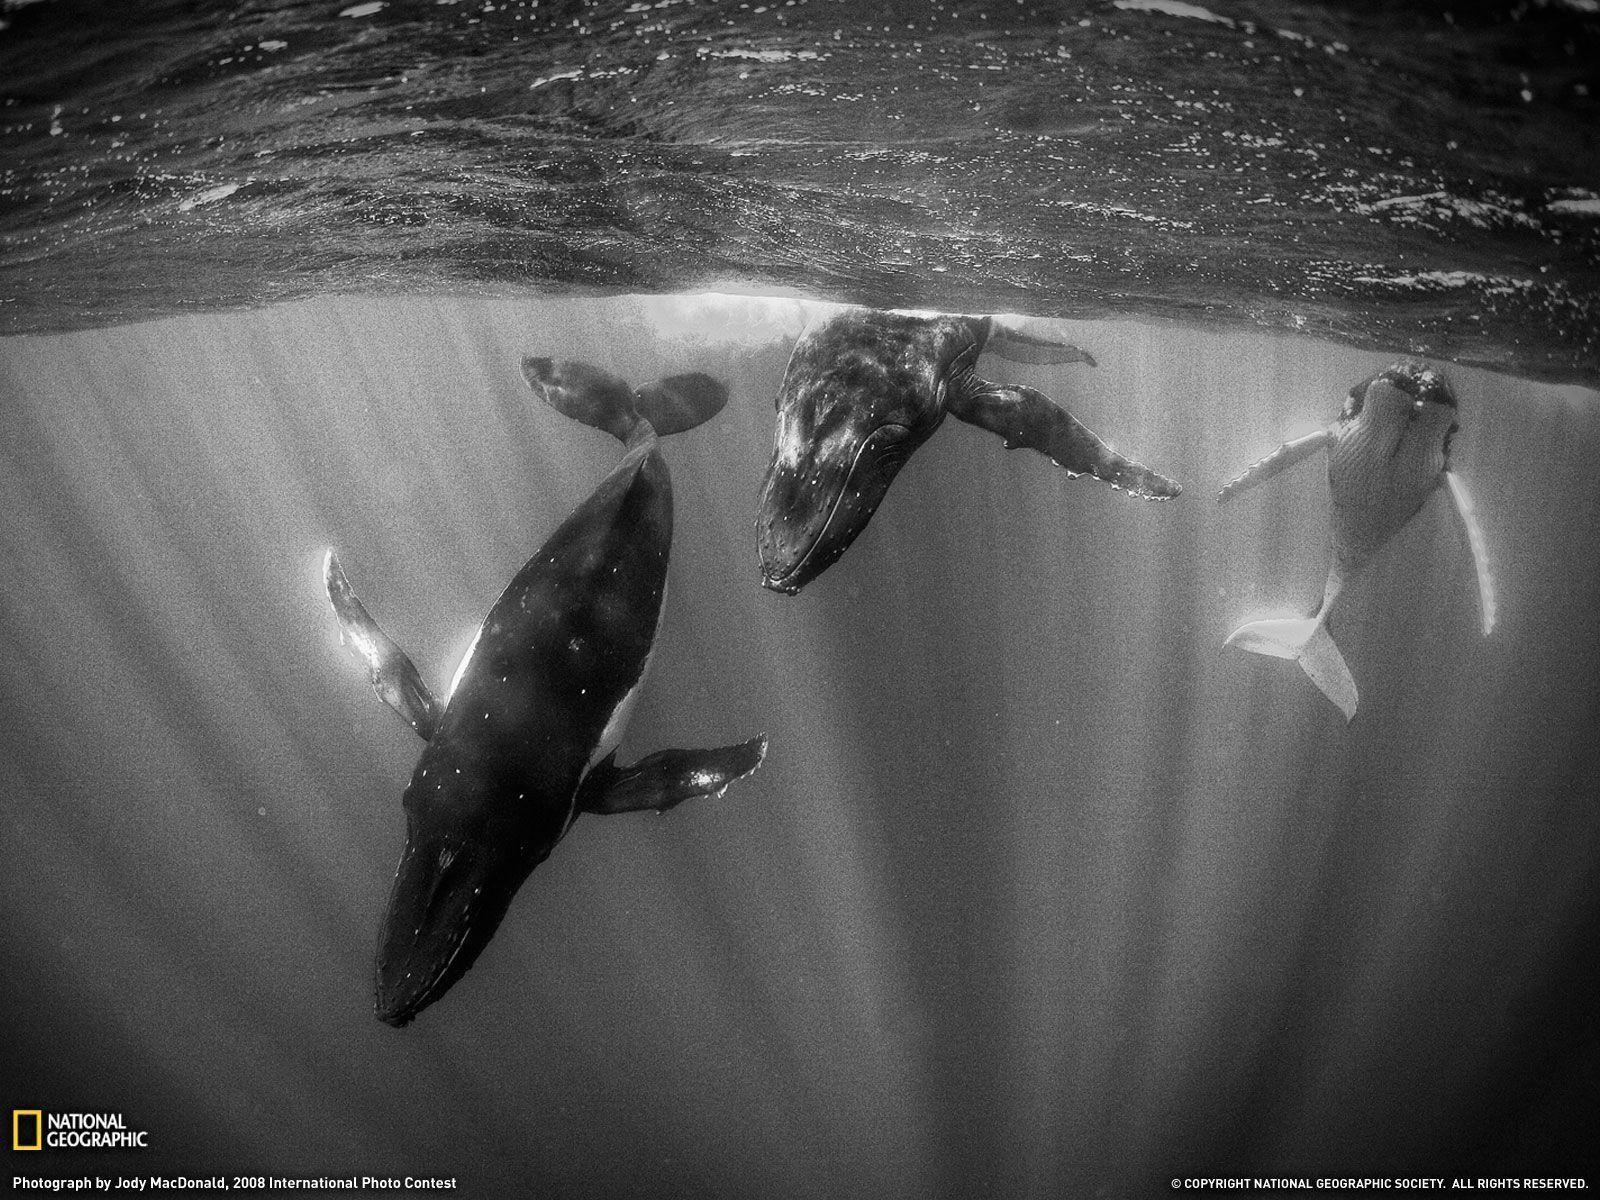 national geographic wallpaper whales